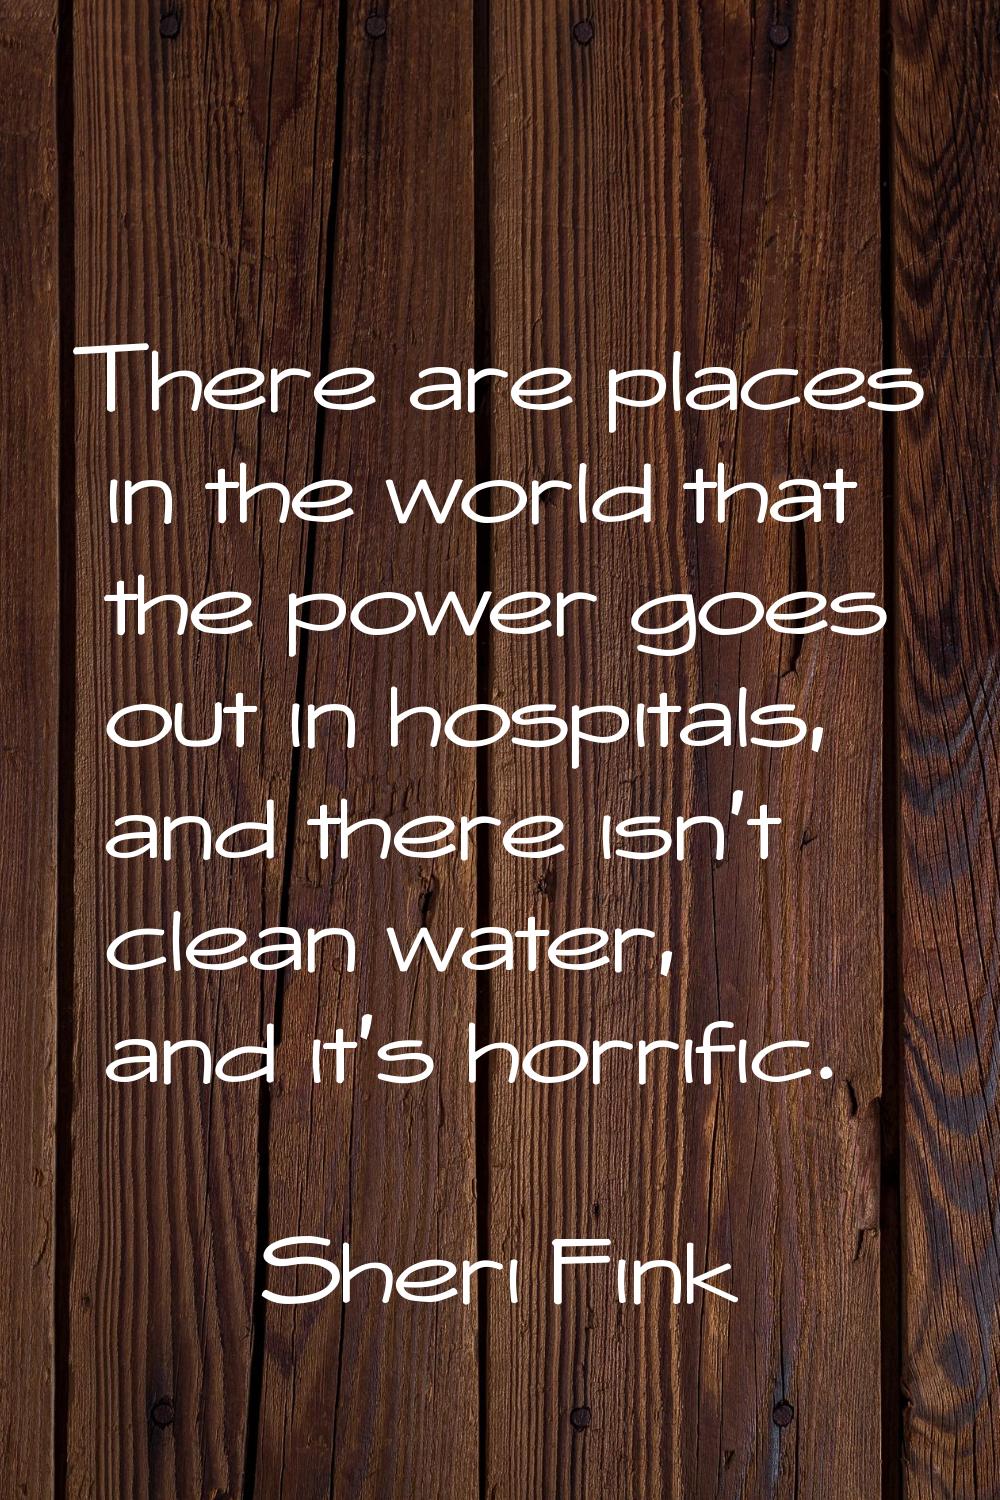 There are places in the world that the power goes out in hospitals, and there isn't clean water, an